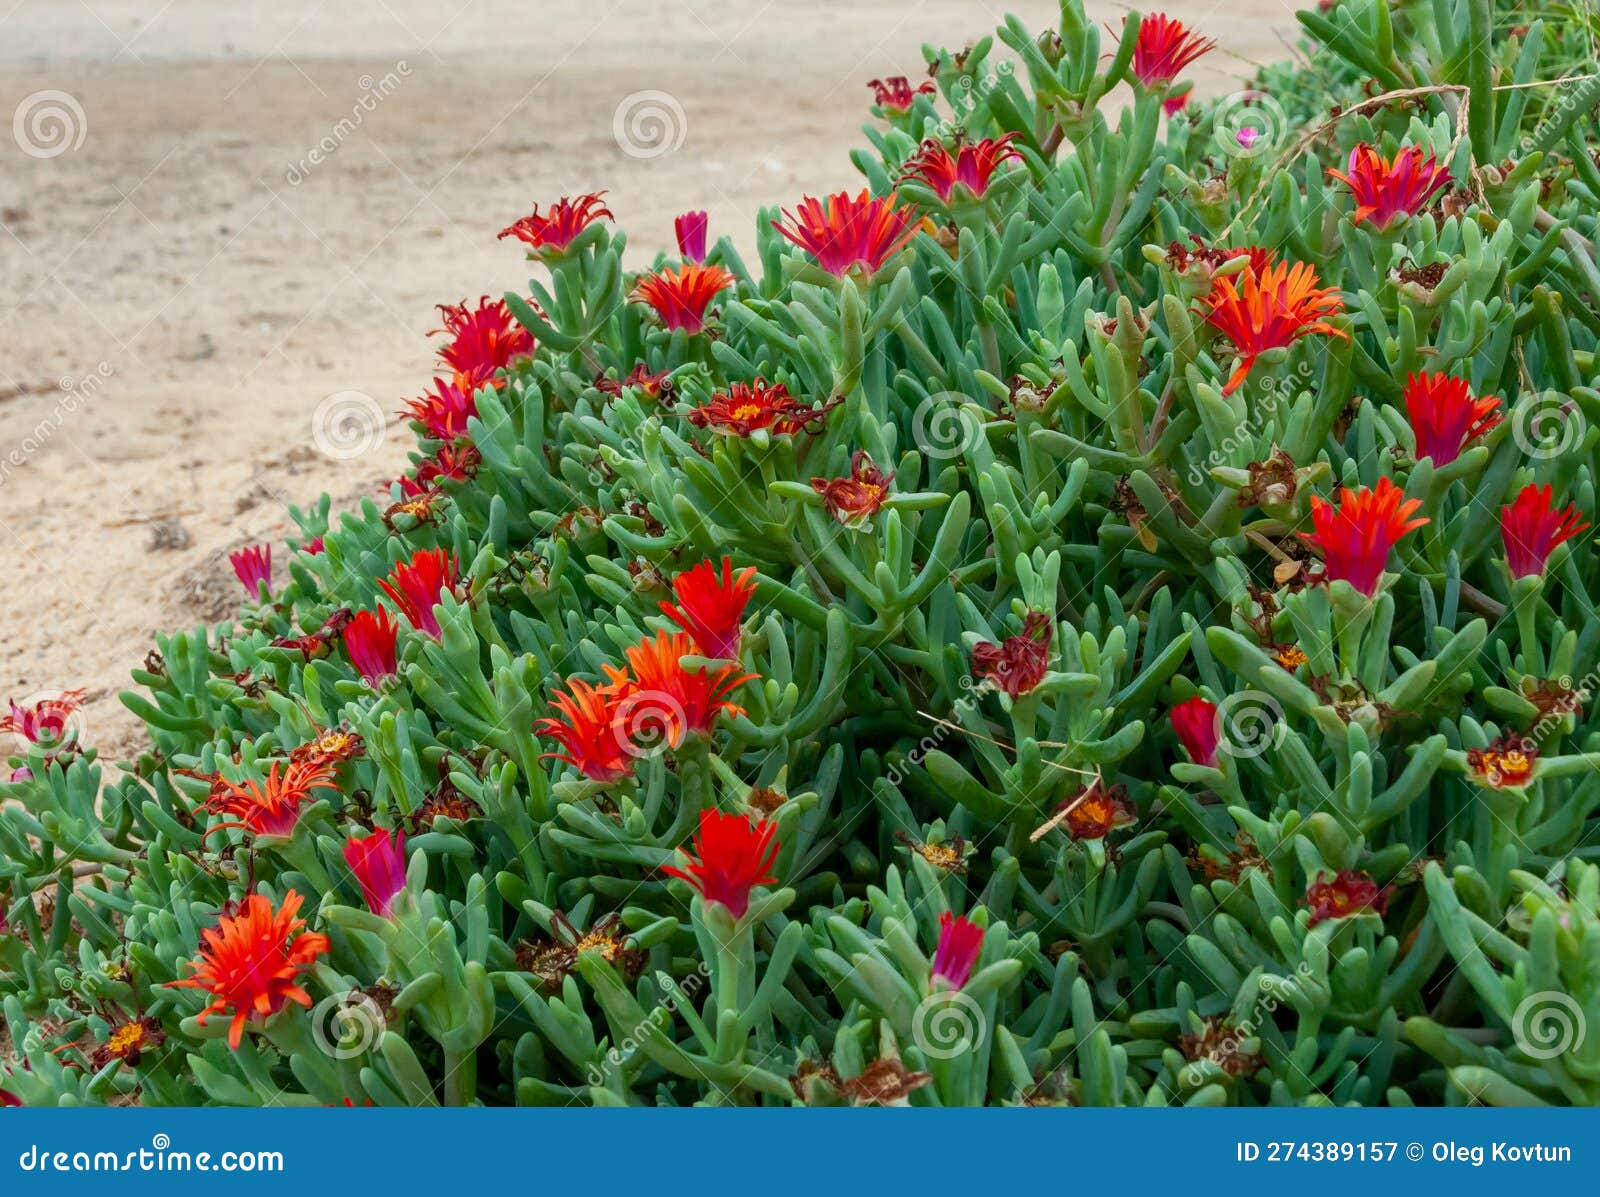 (malephora crocea) groundcover ornamental plant with red flowers near a hotel in marsa alama, egypt